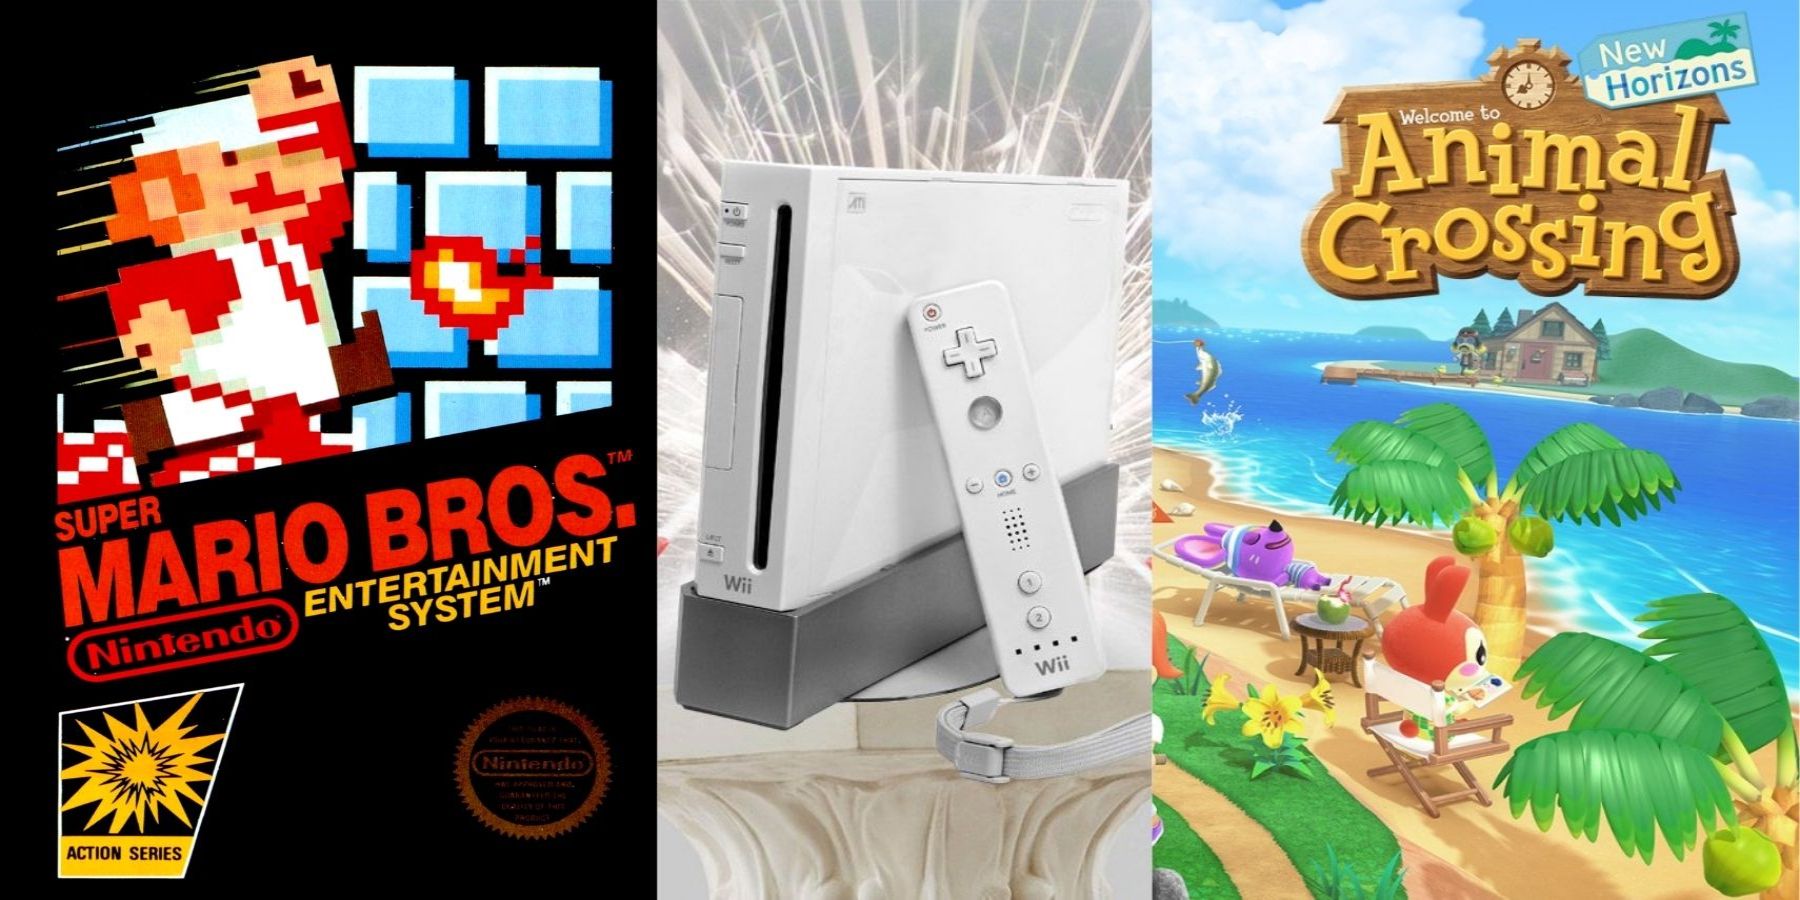 10 Most Important Moments in Nintendos History